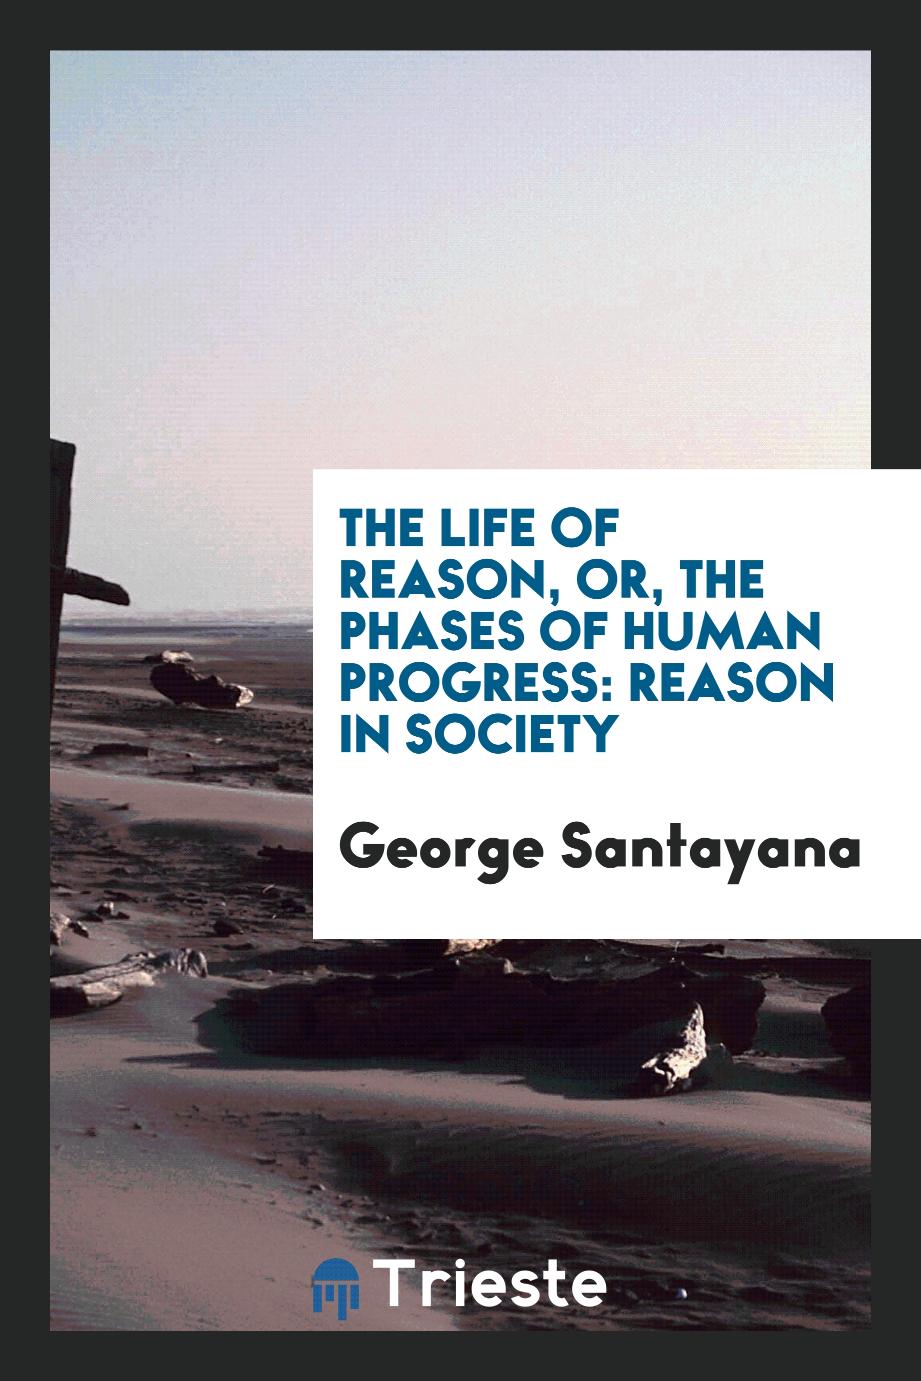 The life of reason, or, The phases of human progress: Reason in Society